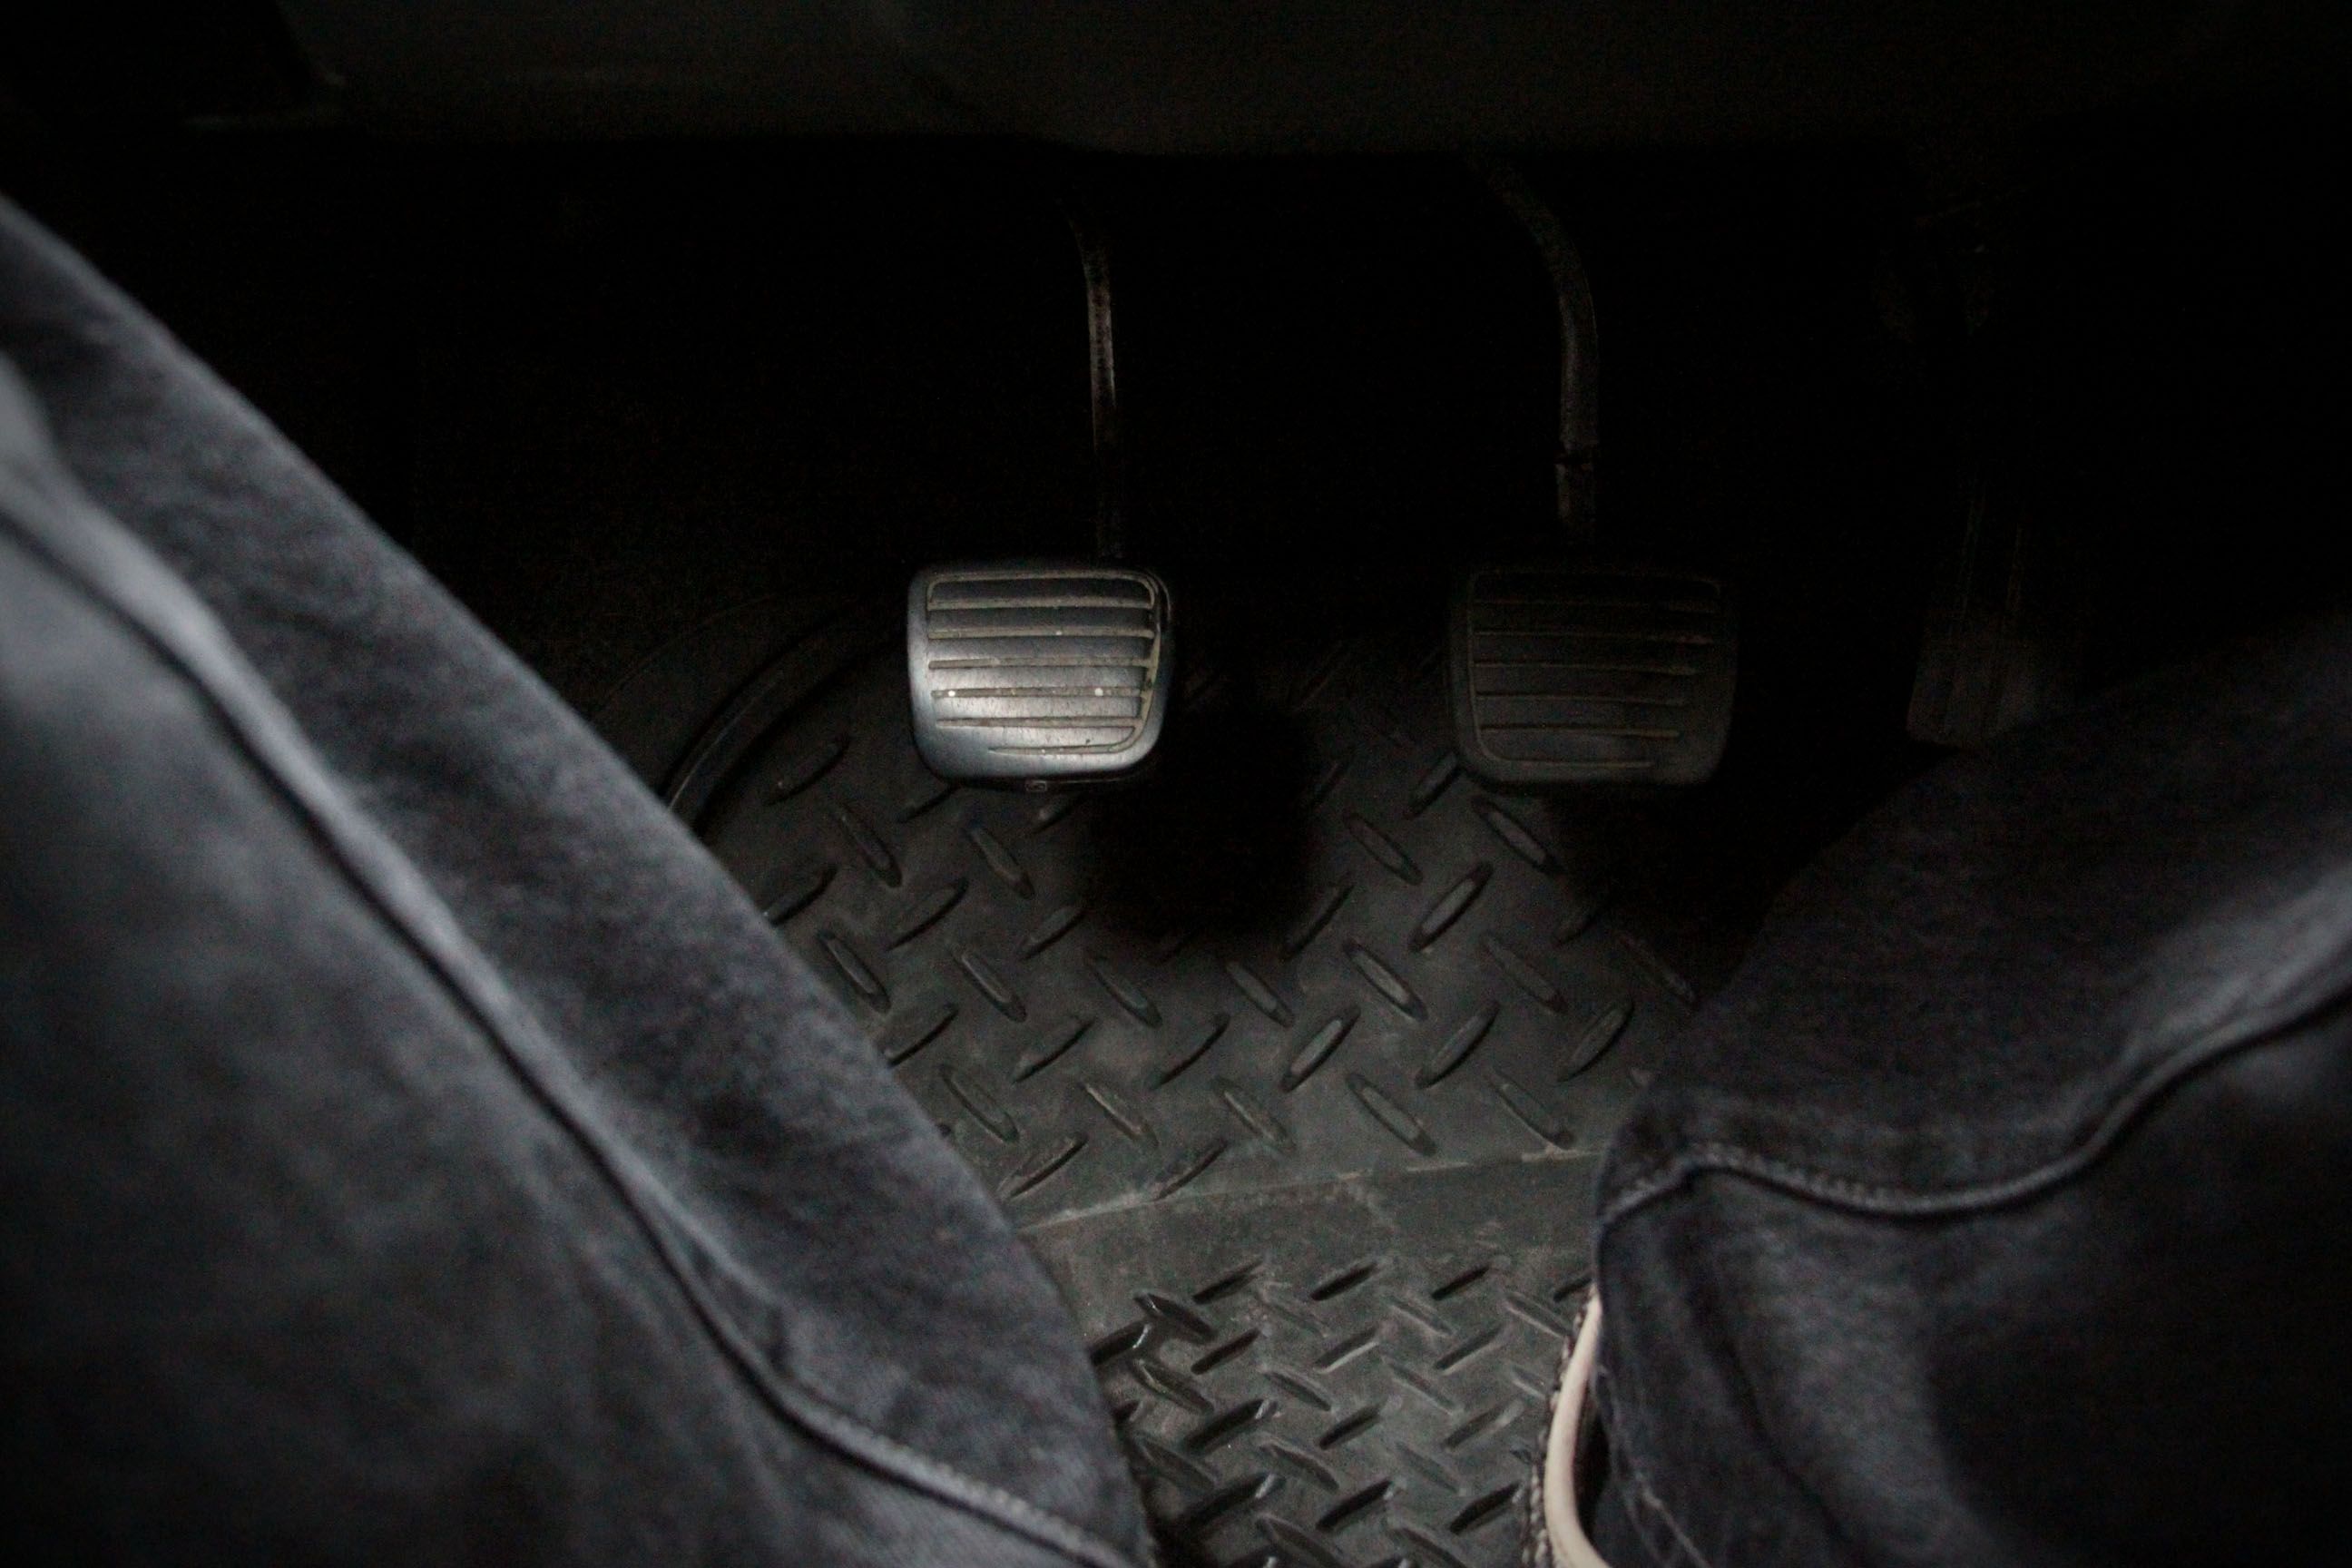 dual pedals on floor of dimly-lit car